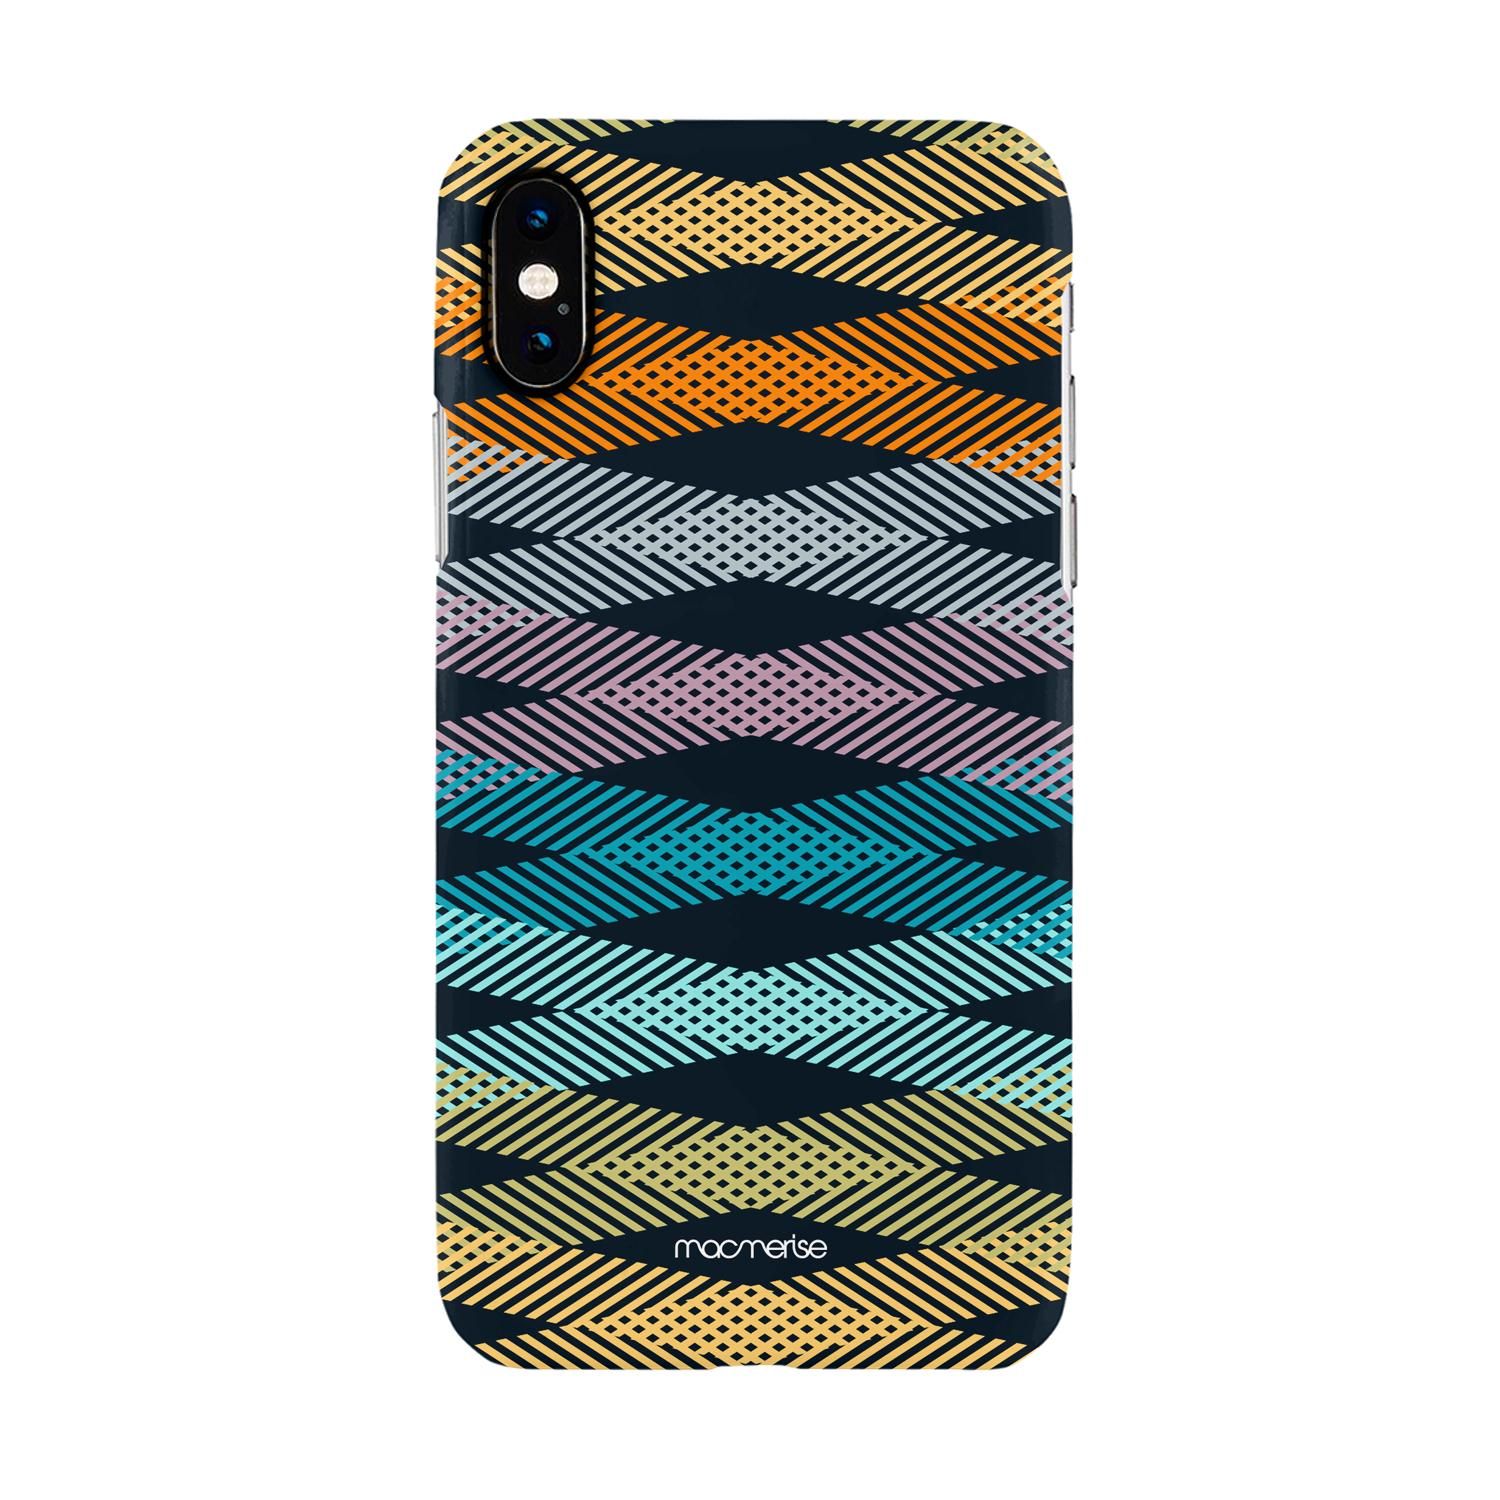 Intertwined - Sleek Case for iPhone XS Max